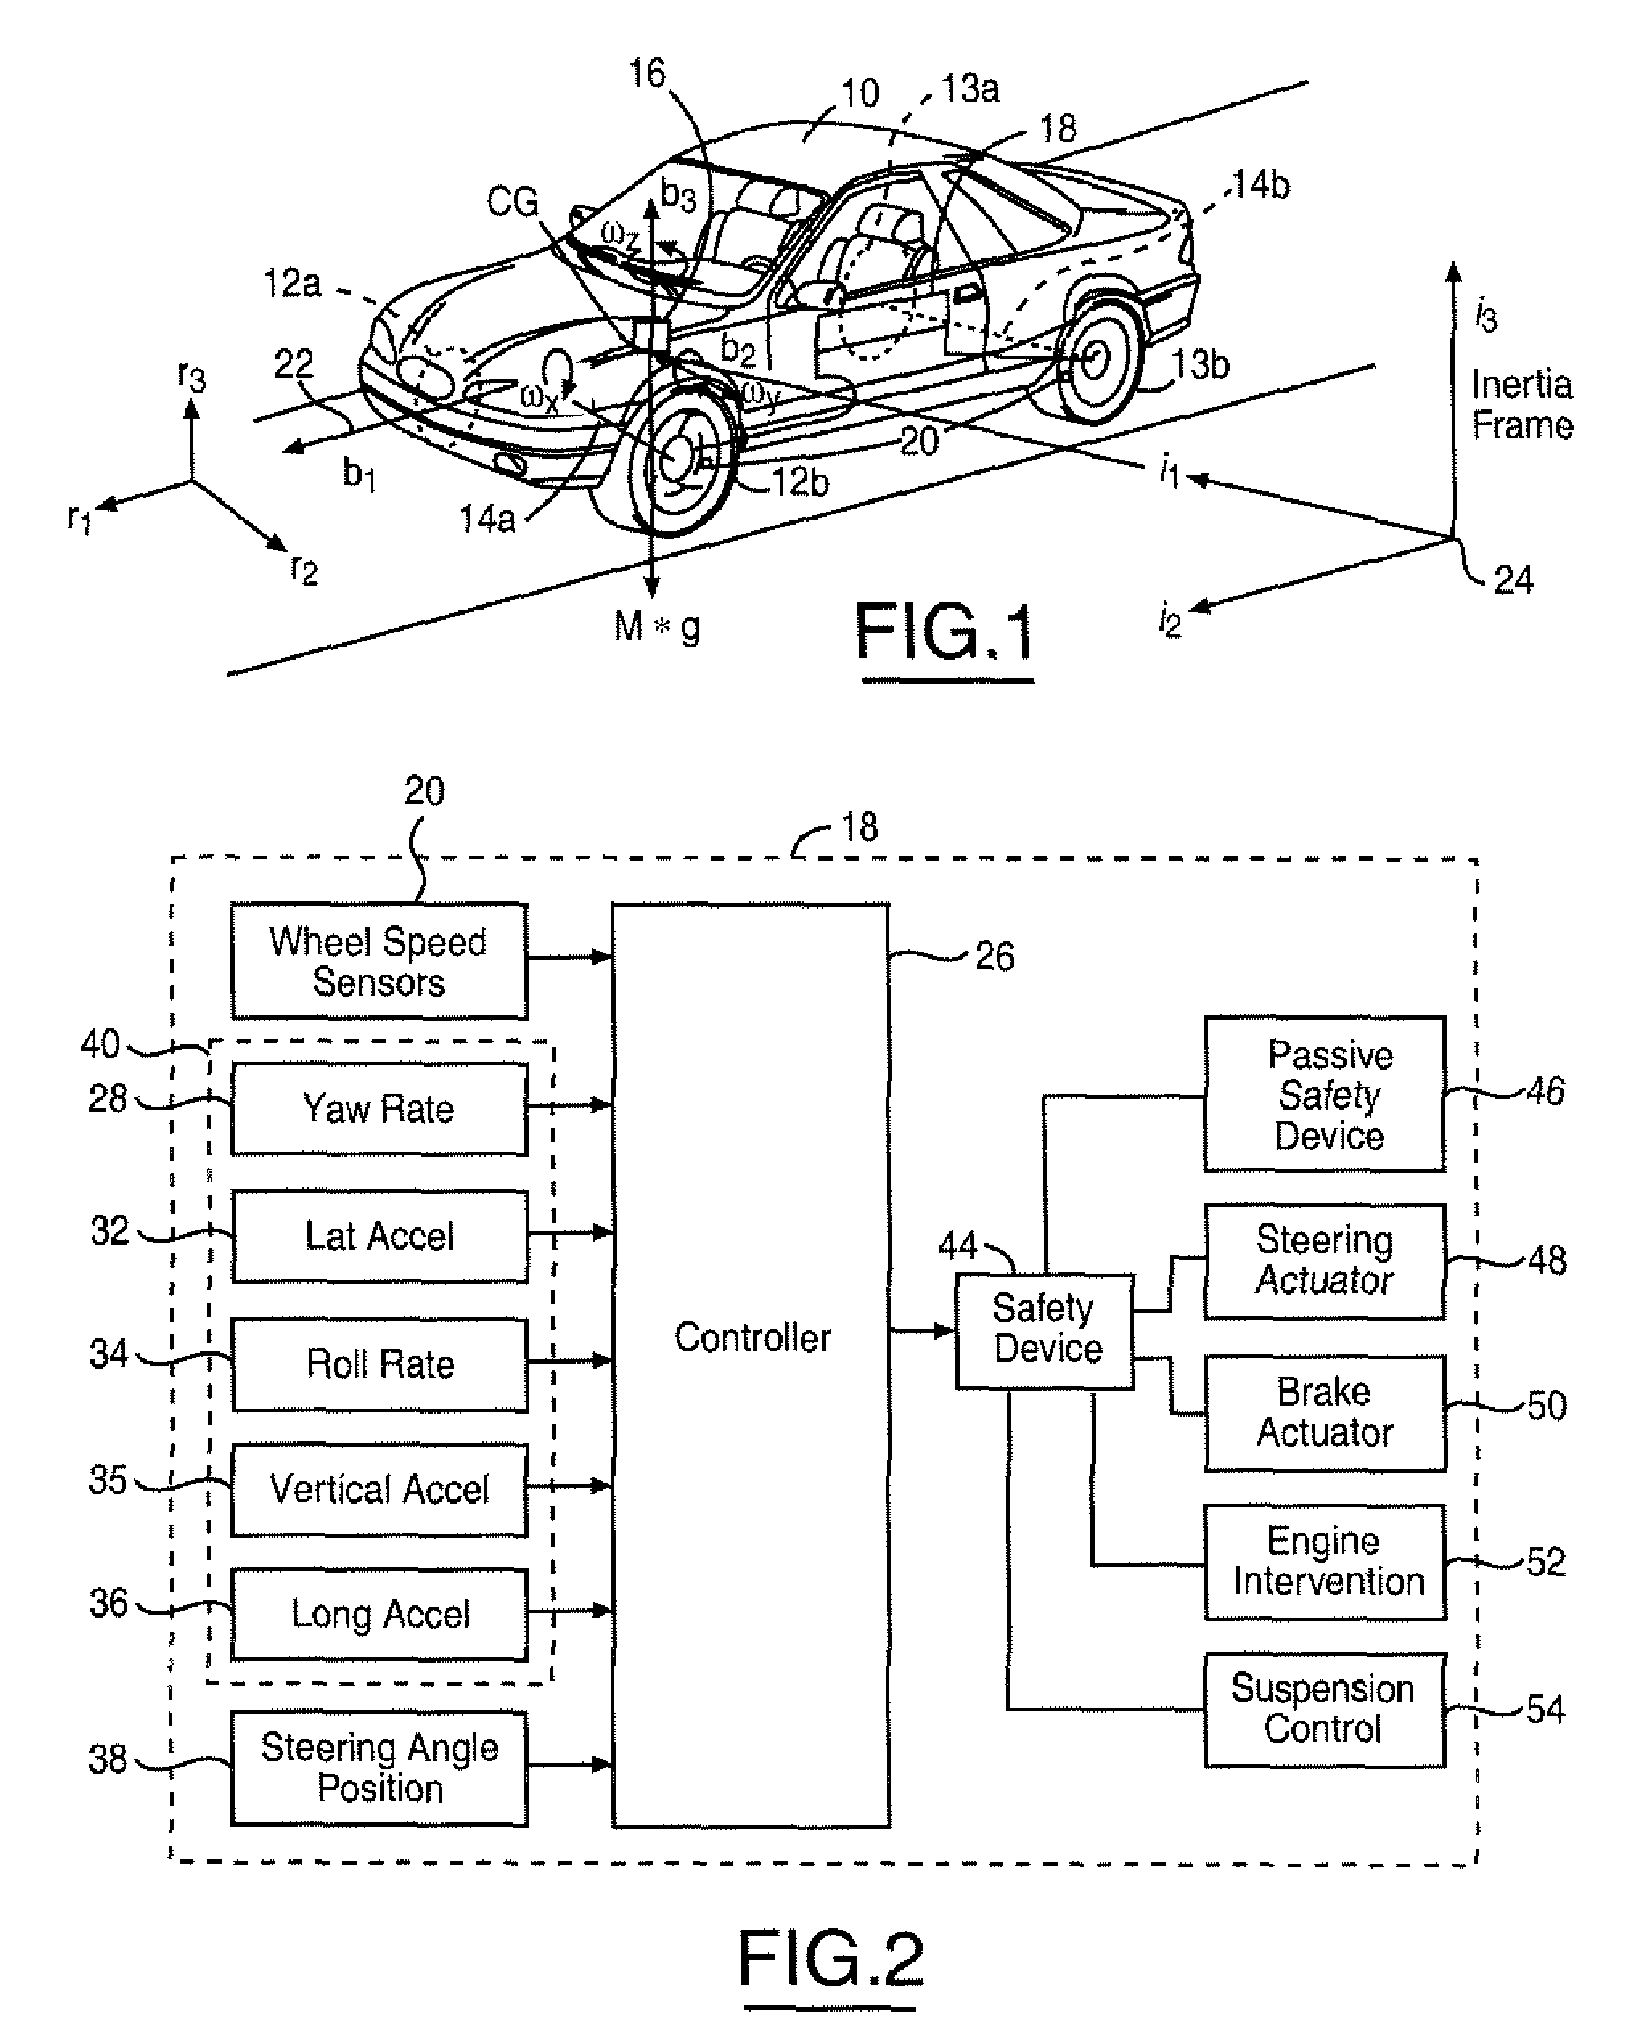 Attitude sensing system for an automotive vehicle relative to the road